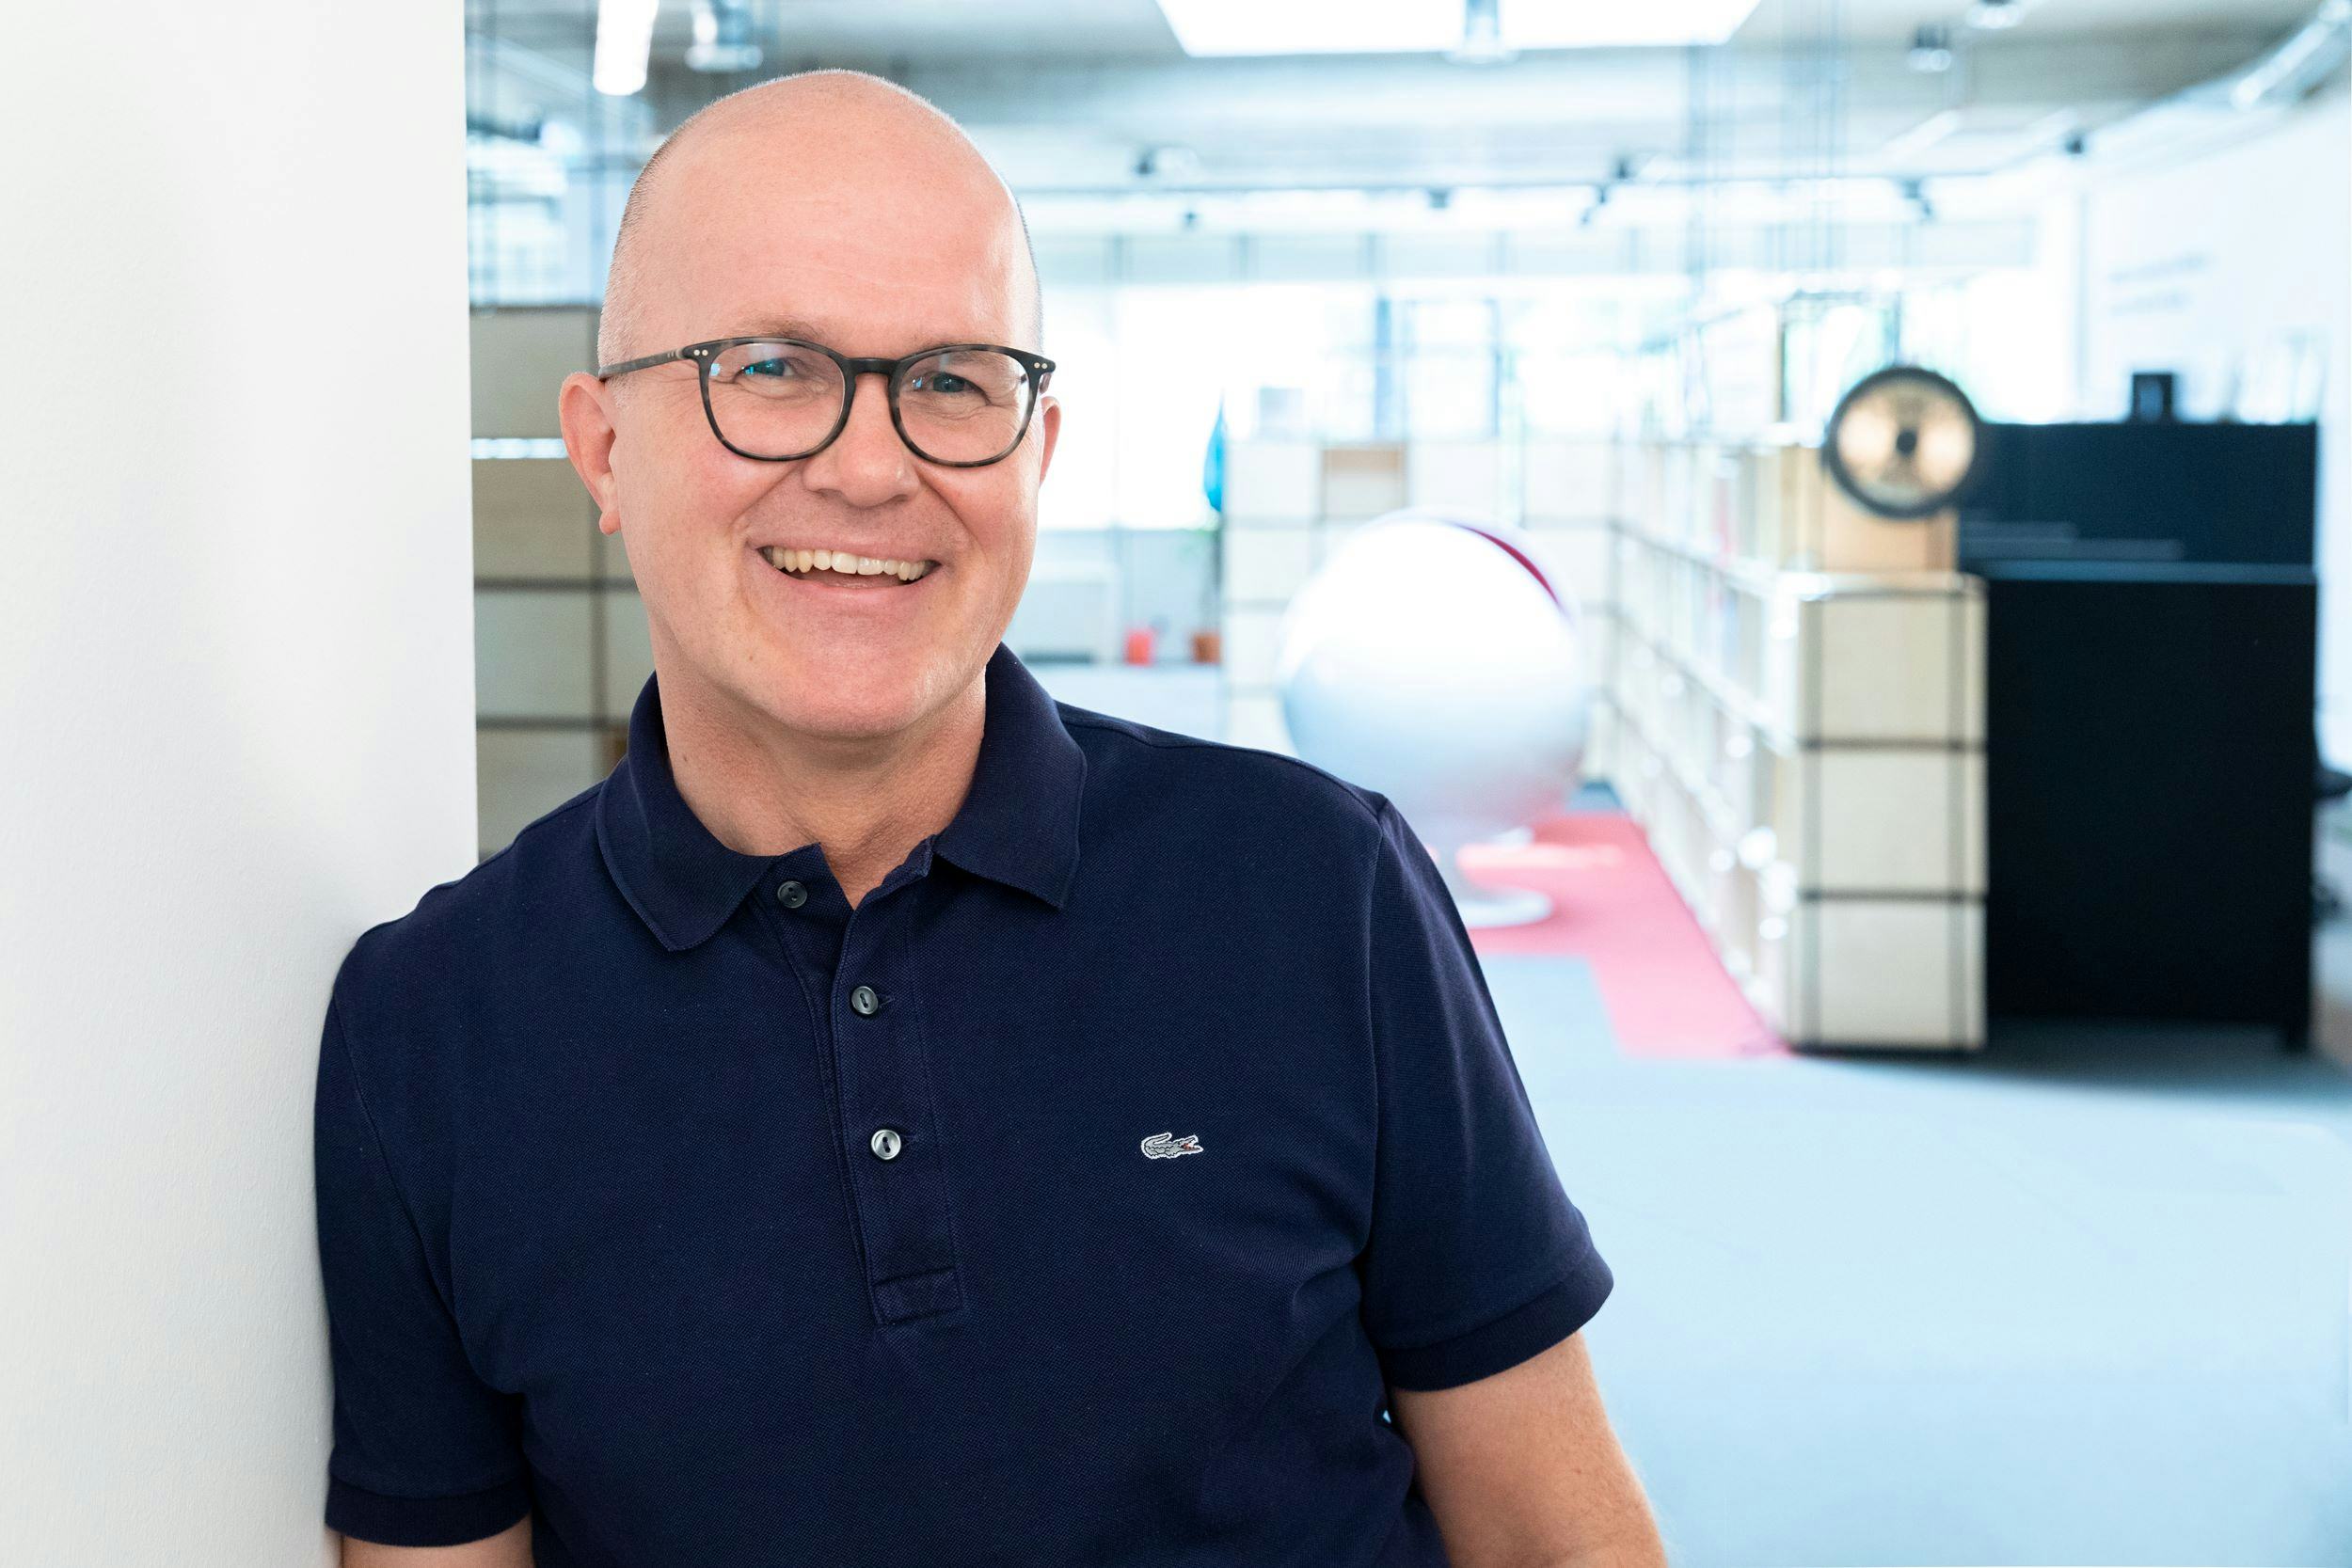 Guido Dohm plans to digitalise the woom supply chain and put more of a focus on corporate social responsibility within the bike industry. - Photo woom 